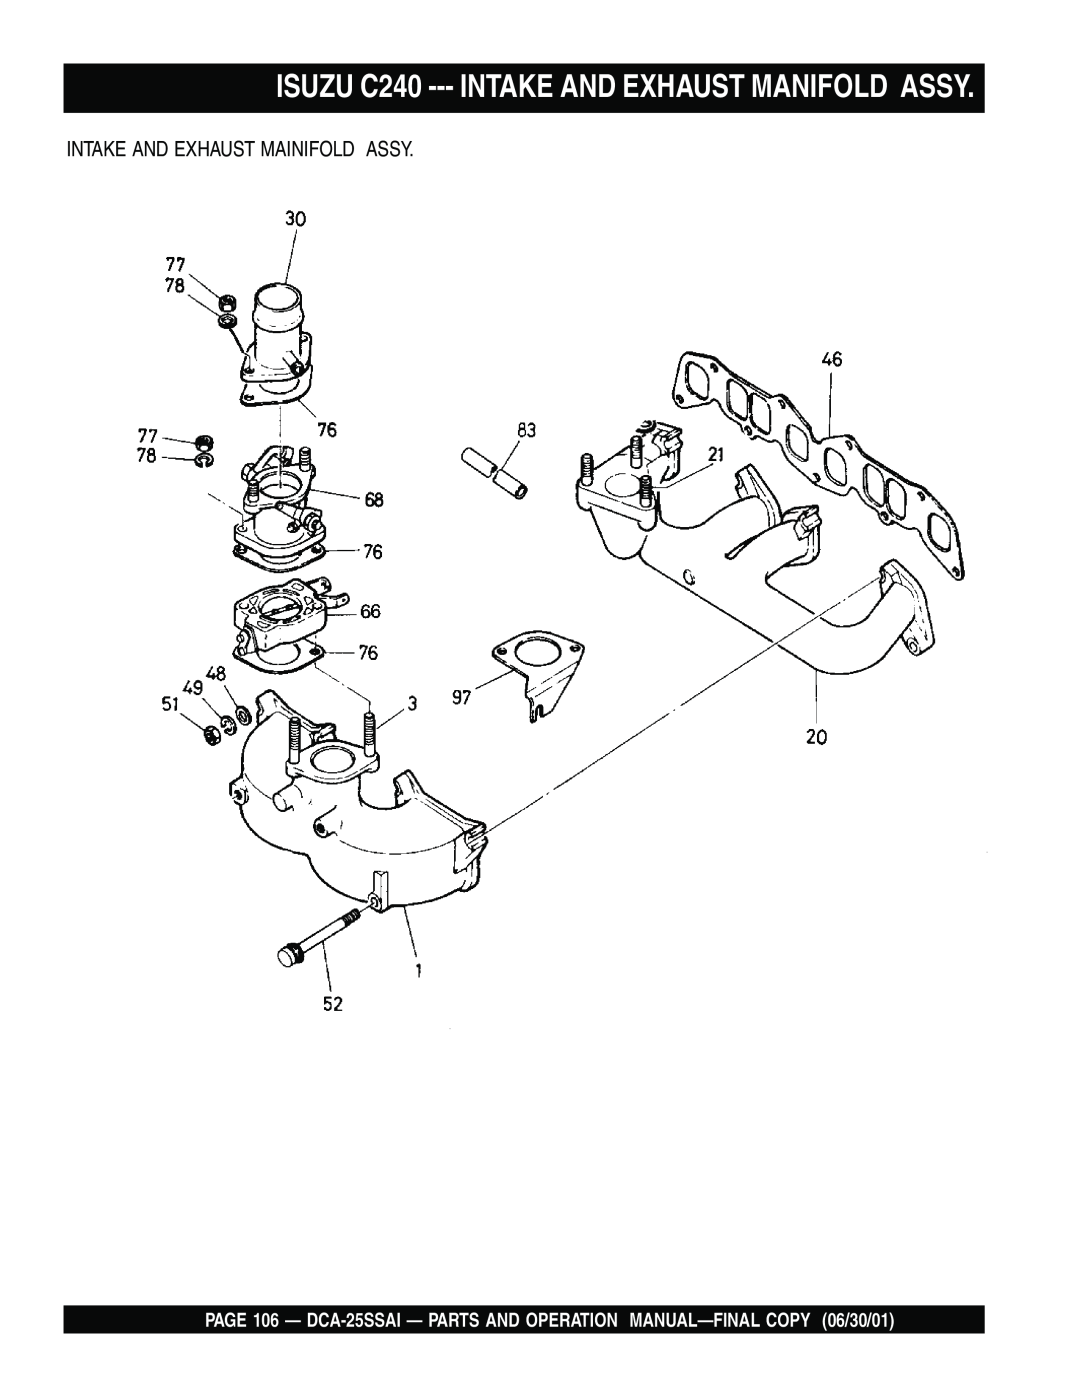 Multiquip DCA-25SSAI operation manual ISUZU C240 --- INTAKE AND EXHAUST MANIFOLD ASSY, Intake And Exhaust Mainifold Assy 